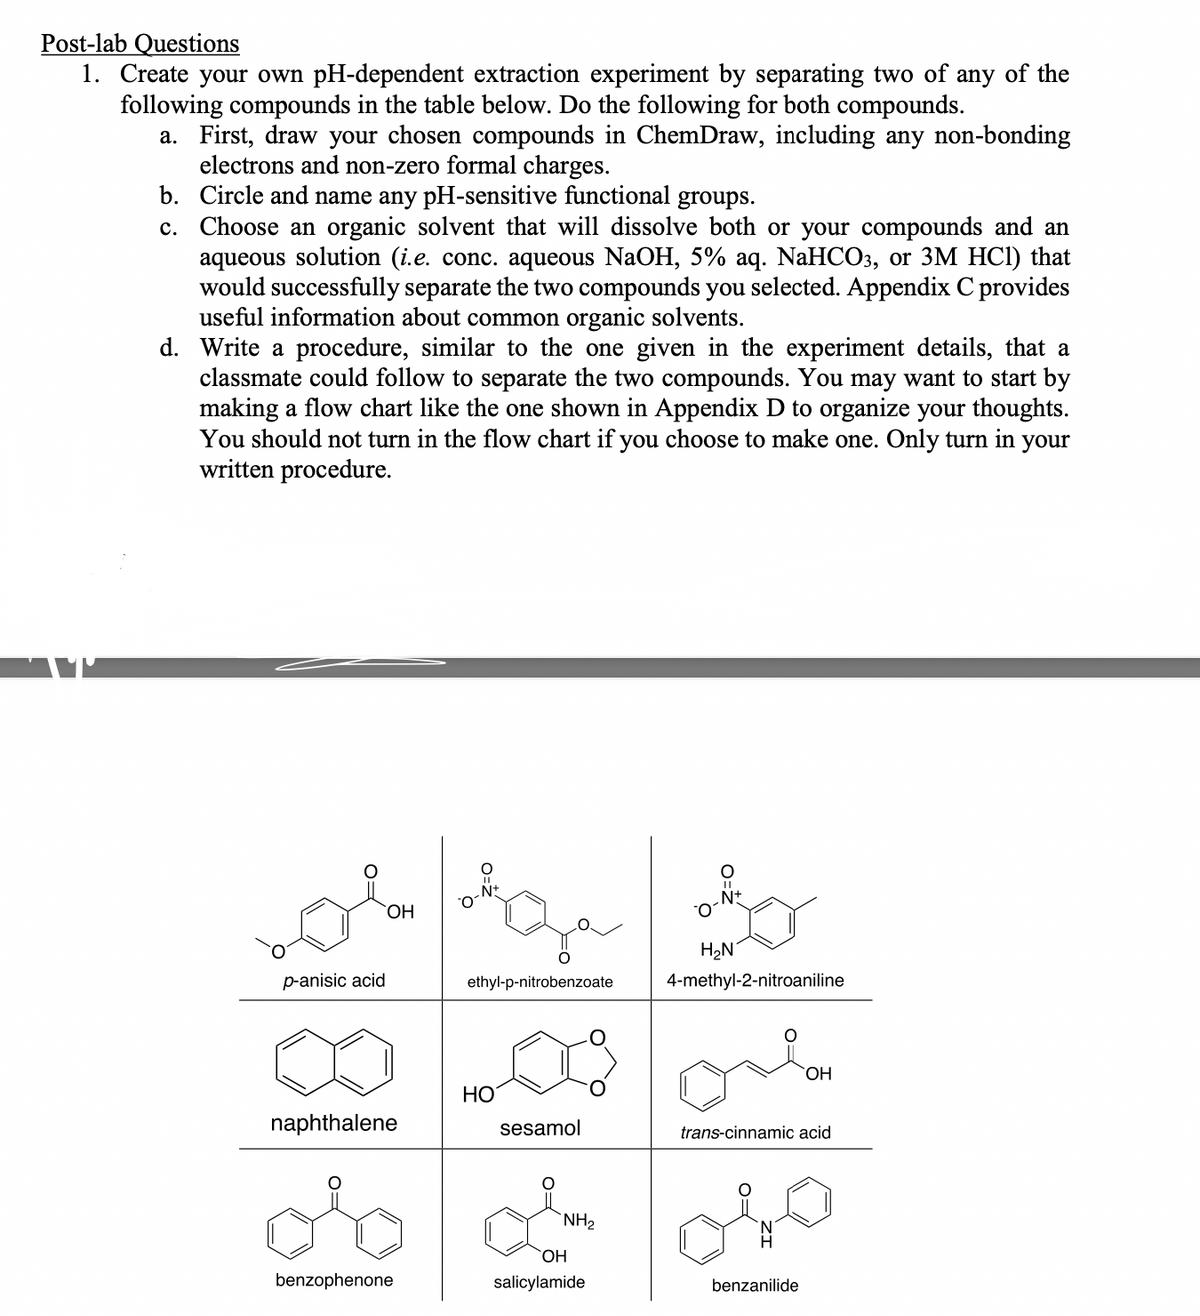 Post-lab Questions
1. Create your own pH-dependent extraction experiment by separating two of any of the
following compounds in the table below. Do the following for both compounds.
a. First, draw your chosen compounds in ChemDraw, including any non-bonding
electrons and non-zero formal charges.
b. Circle and name any pH-sensitive functional groups.
c.
Choose an organic solvent that will dissolve both or your compounds and an
aqueous solution (i.e. conc. aqueous NaOH, 5% aq. NaHCO3, or 3M HCl) that
would successfully separate the two compounds you selected. Appendix C provides
useful information about common organic solvents.
d. Write a procedure, similar to the one given in the experiment details, that a
classmate could follow to separate the two compounds. You may want to start by
making a flow chart like the one shown in Appendix D to organize your thoughts.
You should not turn in the flow chart if you choose to make one. Only turn in your
written procedure.
O=
p-anisic acid
OH
naphthalene
benzophenone
-N+
ethyl-p-nitrobenzoate
HO
sesamol
NH₂
OH
salicylamide
||
_N+
H₂N
4-methyl-2-nitroaniline
OH
trans-cinnamic acid
benzanilide